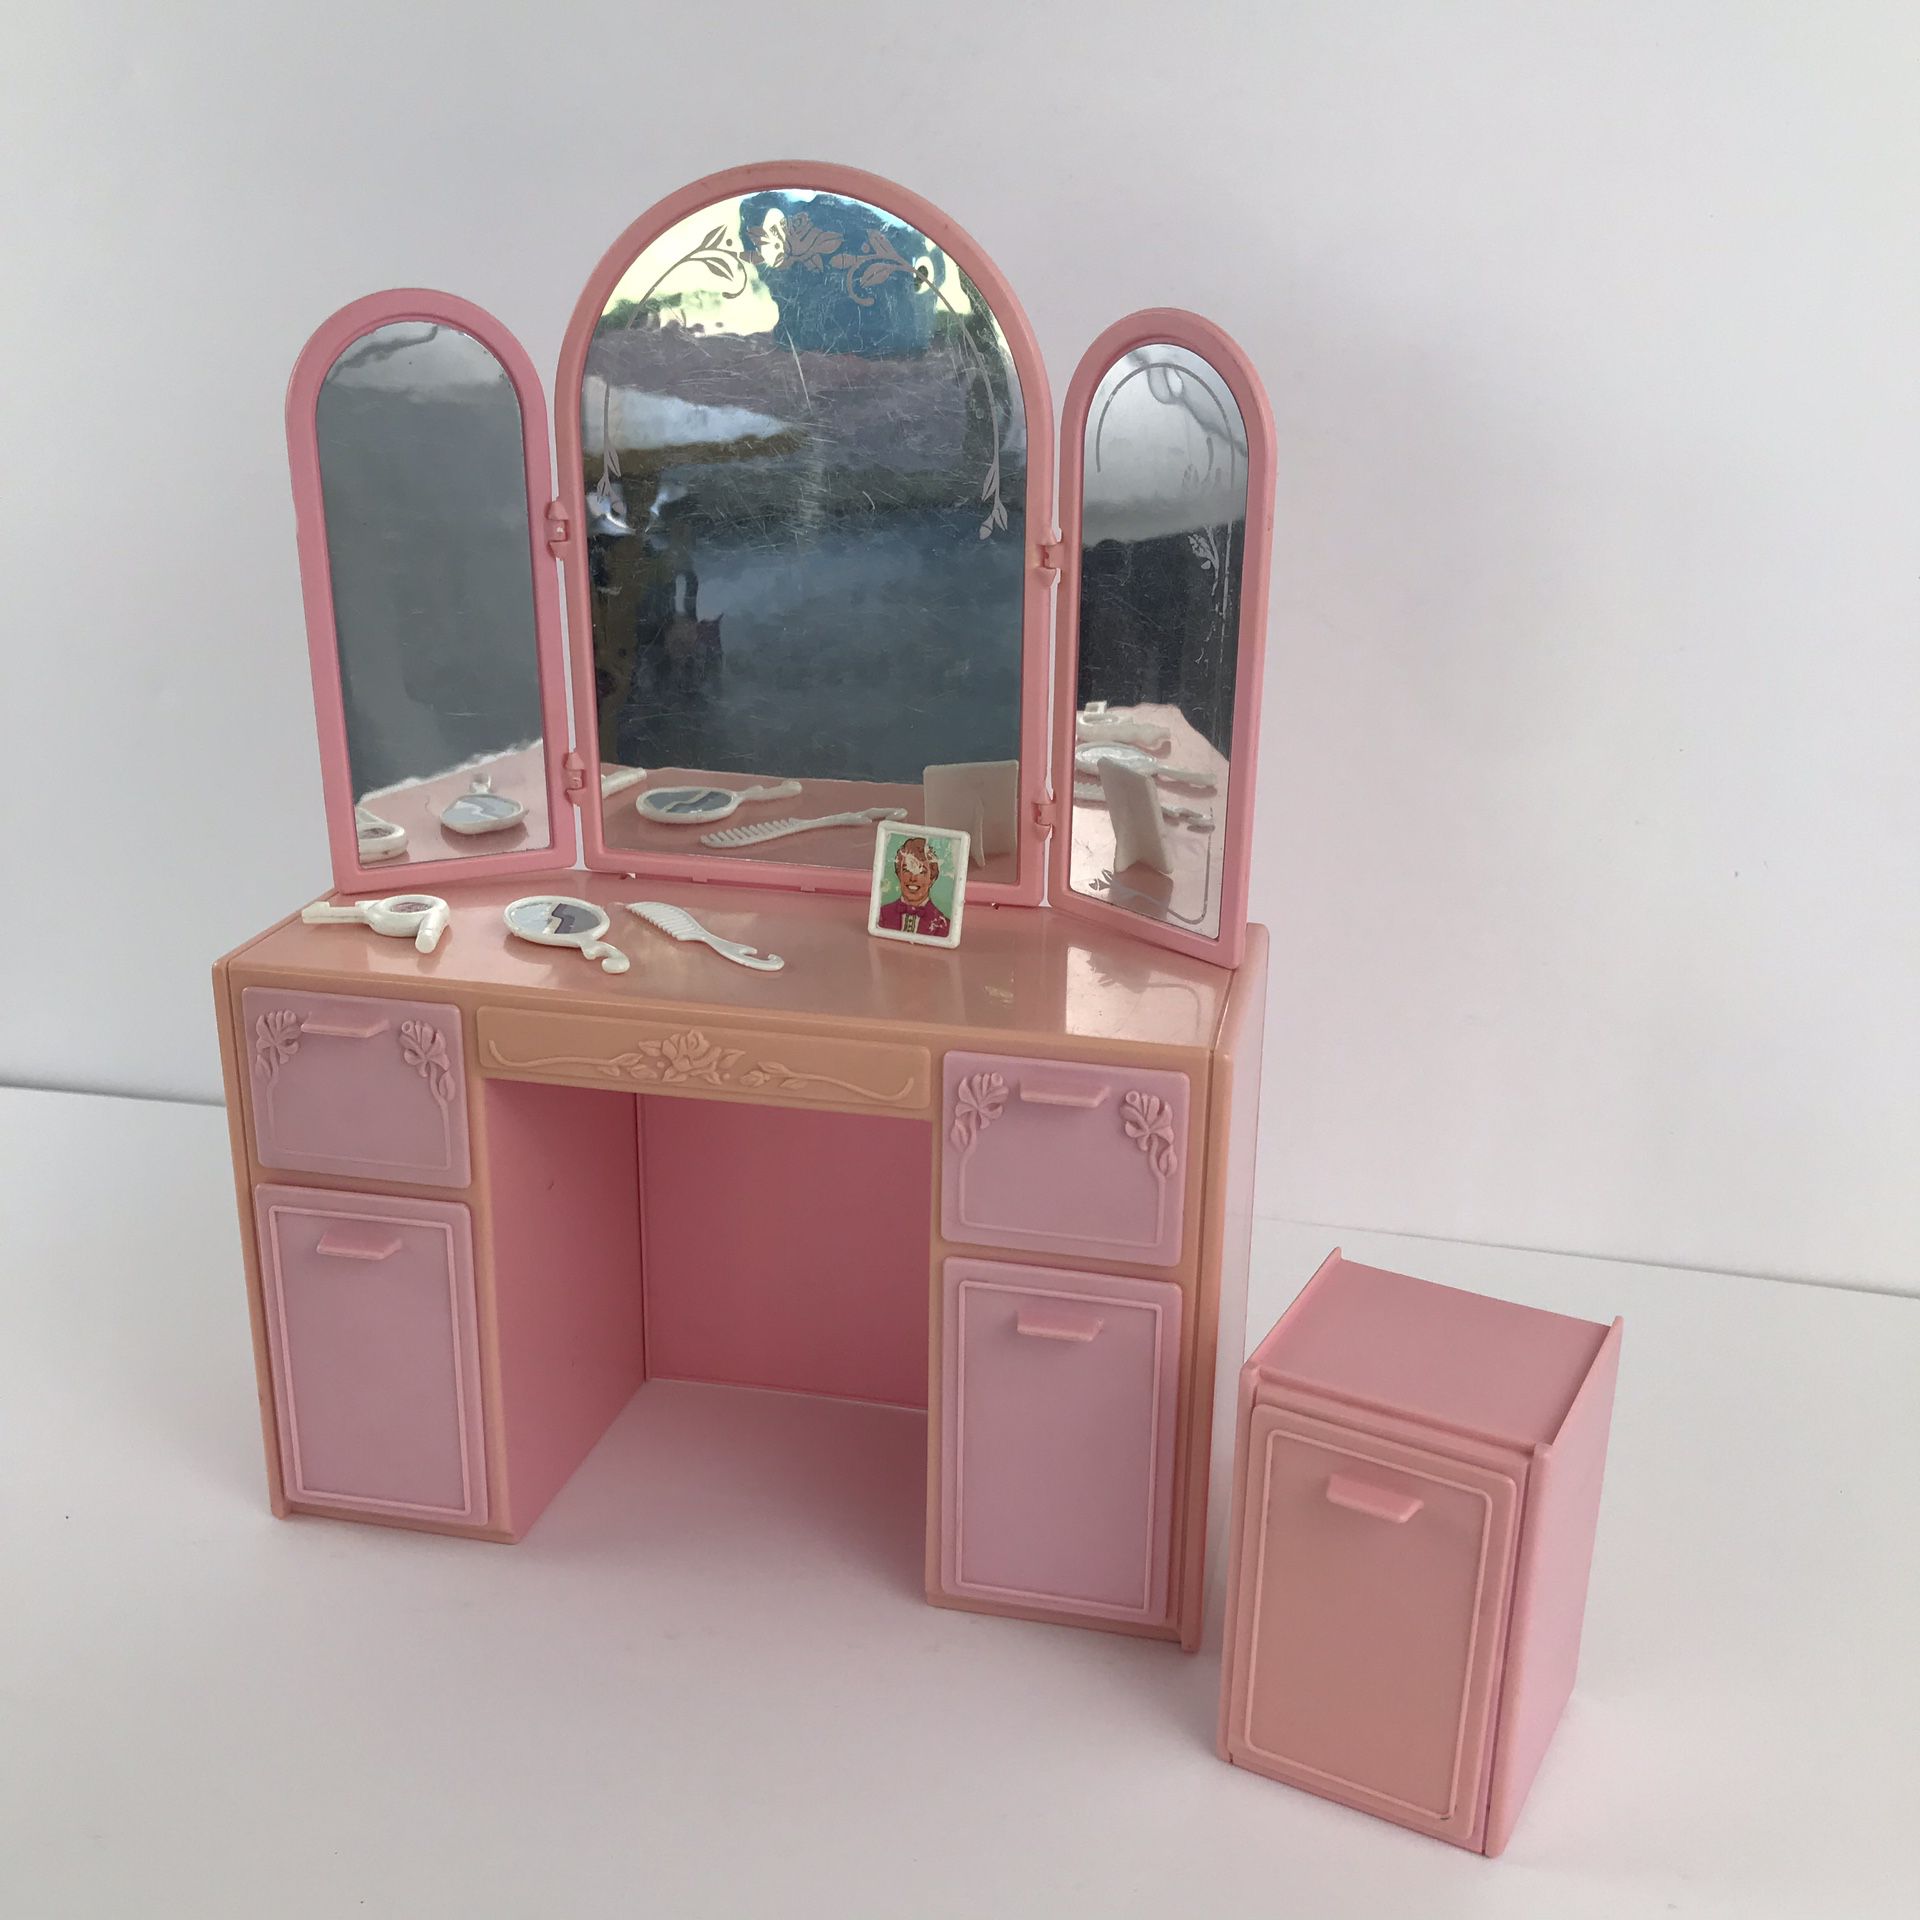 Barbie Vanity Dresser with Accessories 1990s part of the snaps broke off the back of the mirror so you need to use tape to keep the mirror up